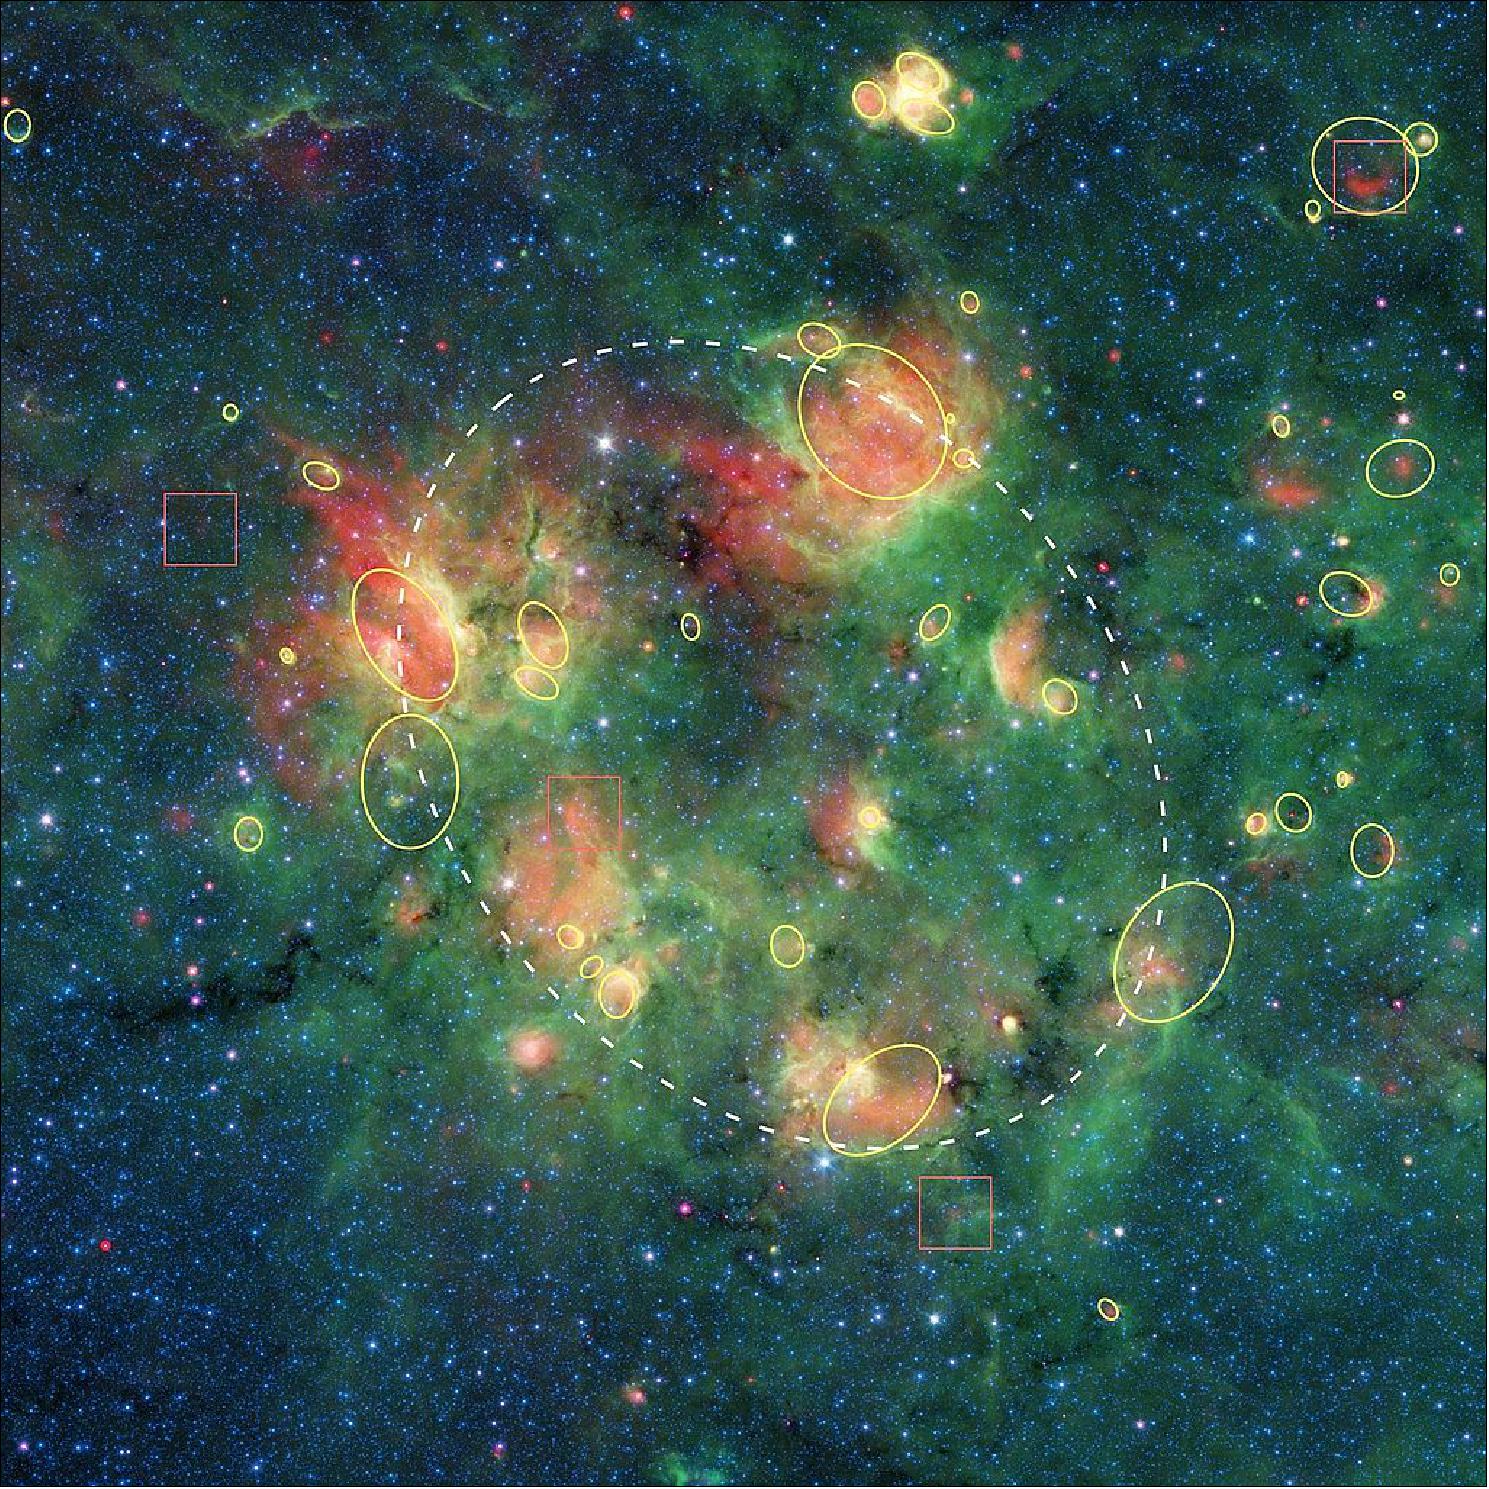 Figure 41: In the annotated image, the yellow circles and ovals outline more than 30 bubbles. This cloud of gas and dust is full of bubbles, which are inflated by wind and radiation from massive young stars. Yellow circles and ovals show the locations of more than 30 bubbles. Squares indicate bow shocks, red arcs of warm dust formed as winds from fast-moving stars push aside dust grains (image credit: NASA/JPL-Caltech/Milky Way Project)